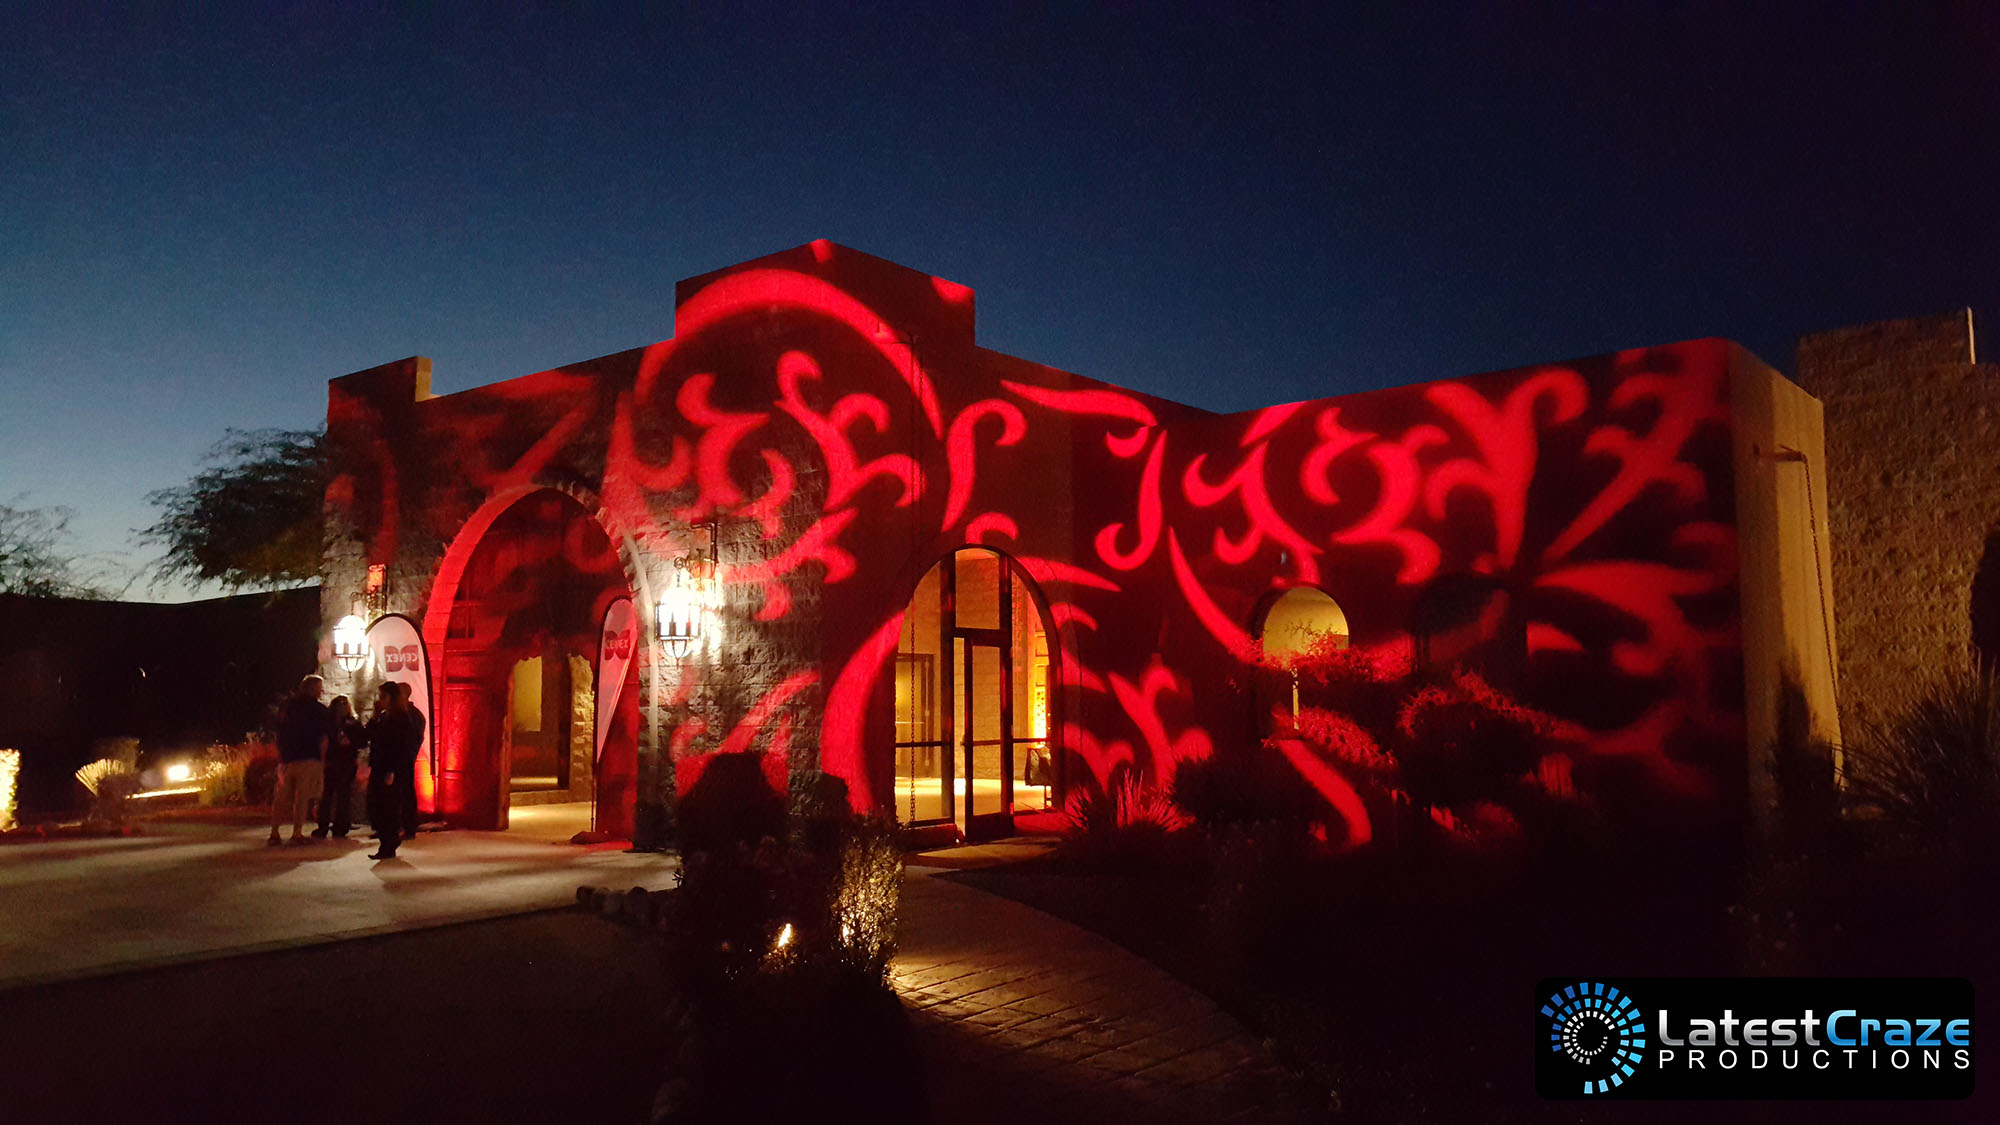 red swirl pattern gobo building outside moroccan theme scottsdale Latest Craze Productions